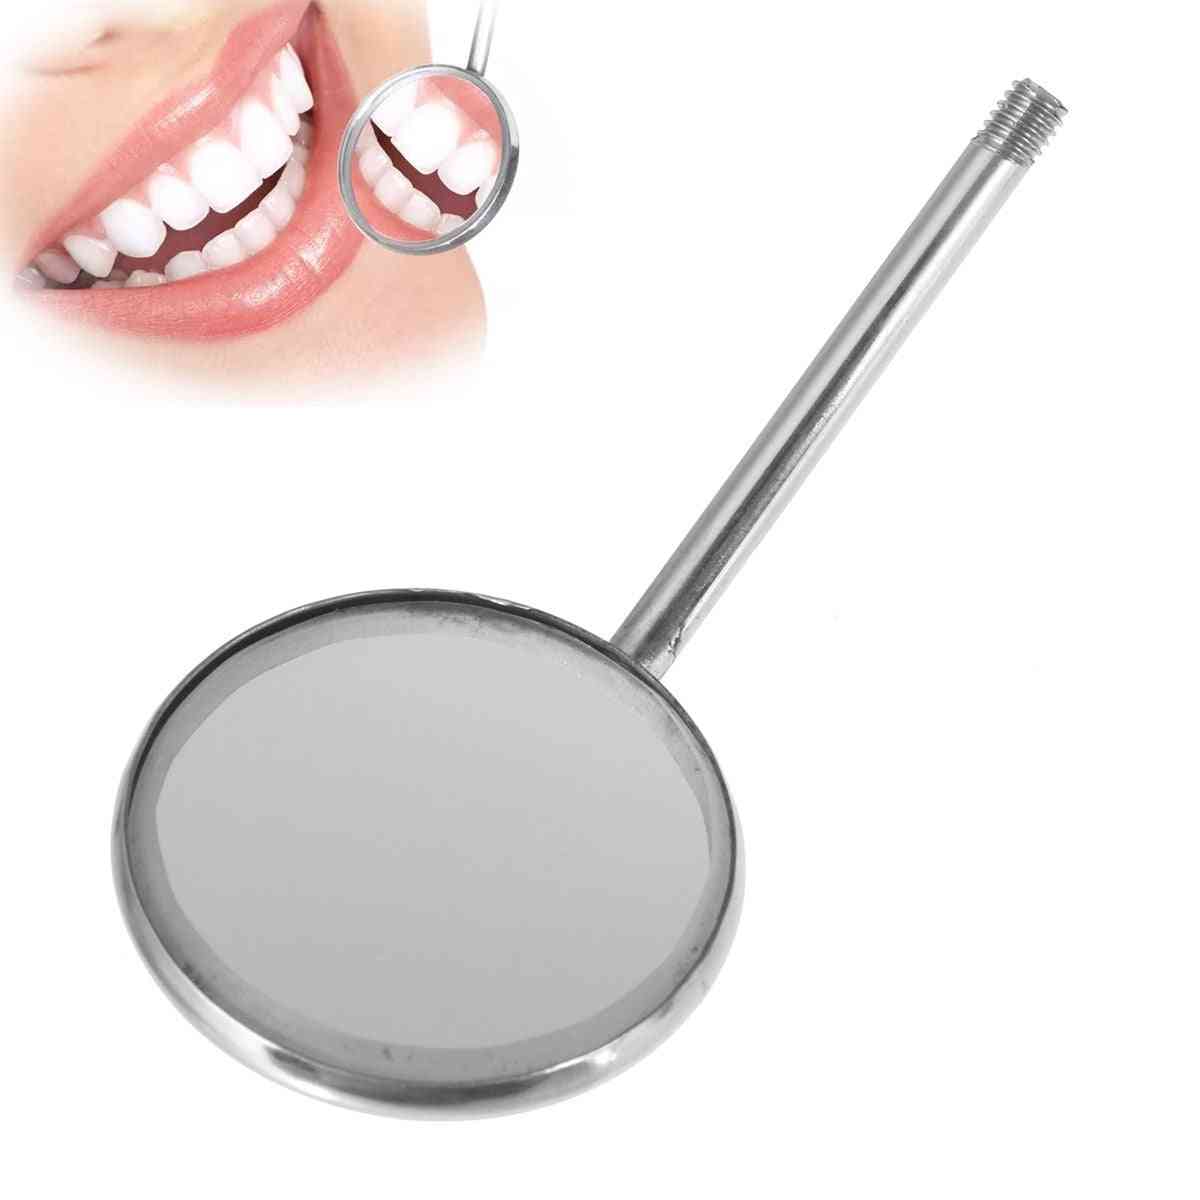 Stainless Steel Dental Mouth Mirror Reflector